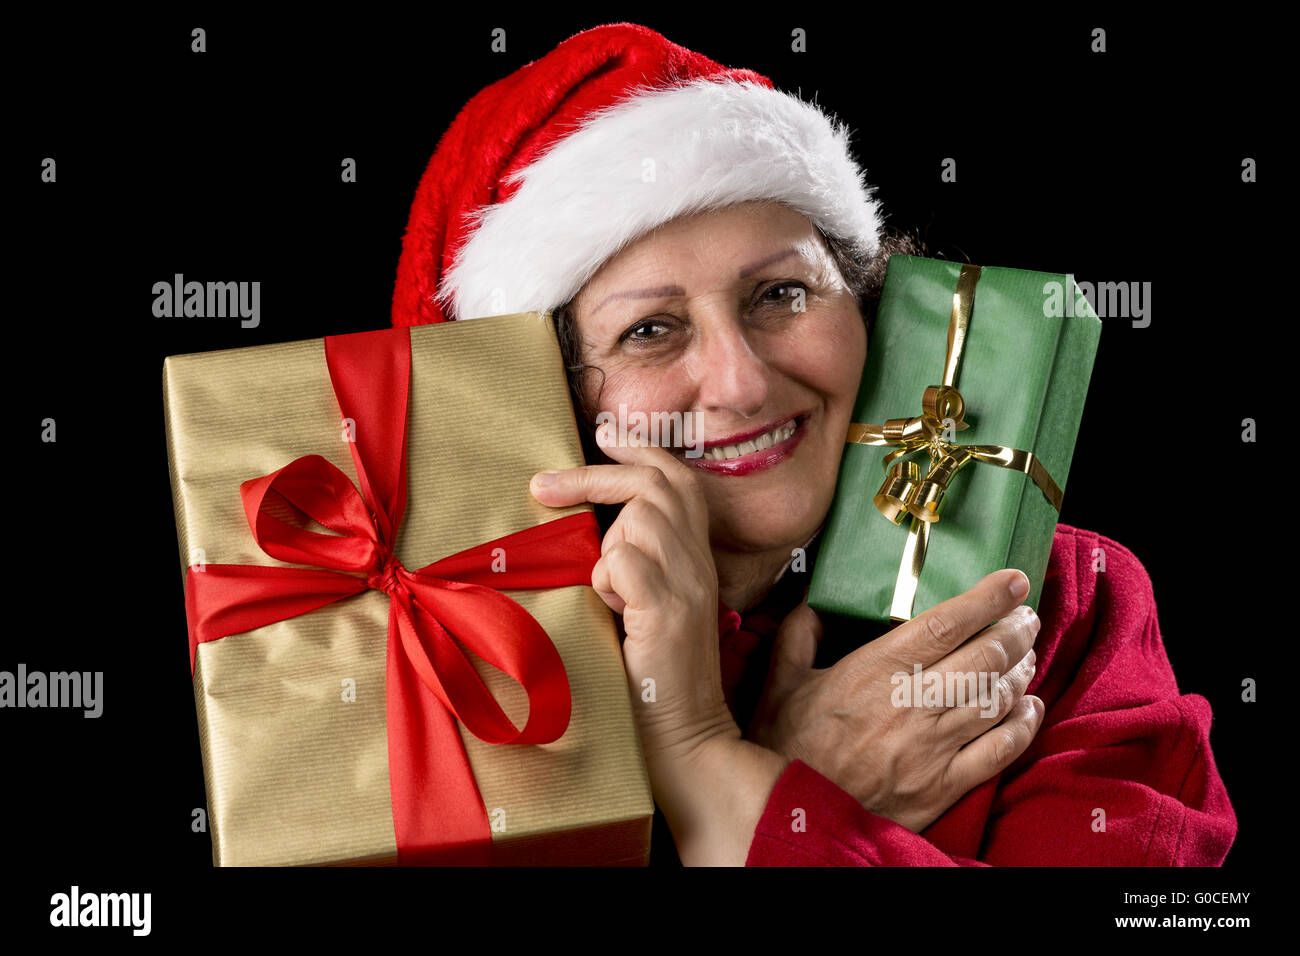 Old Woman in Red with Two Wrapped Christmas Gifts Stock Photo